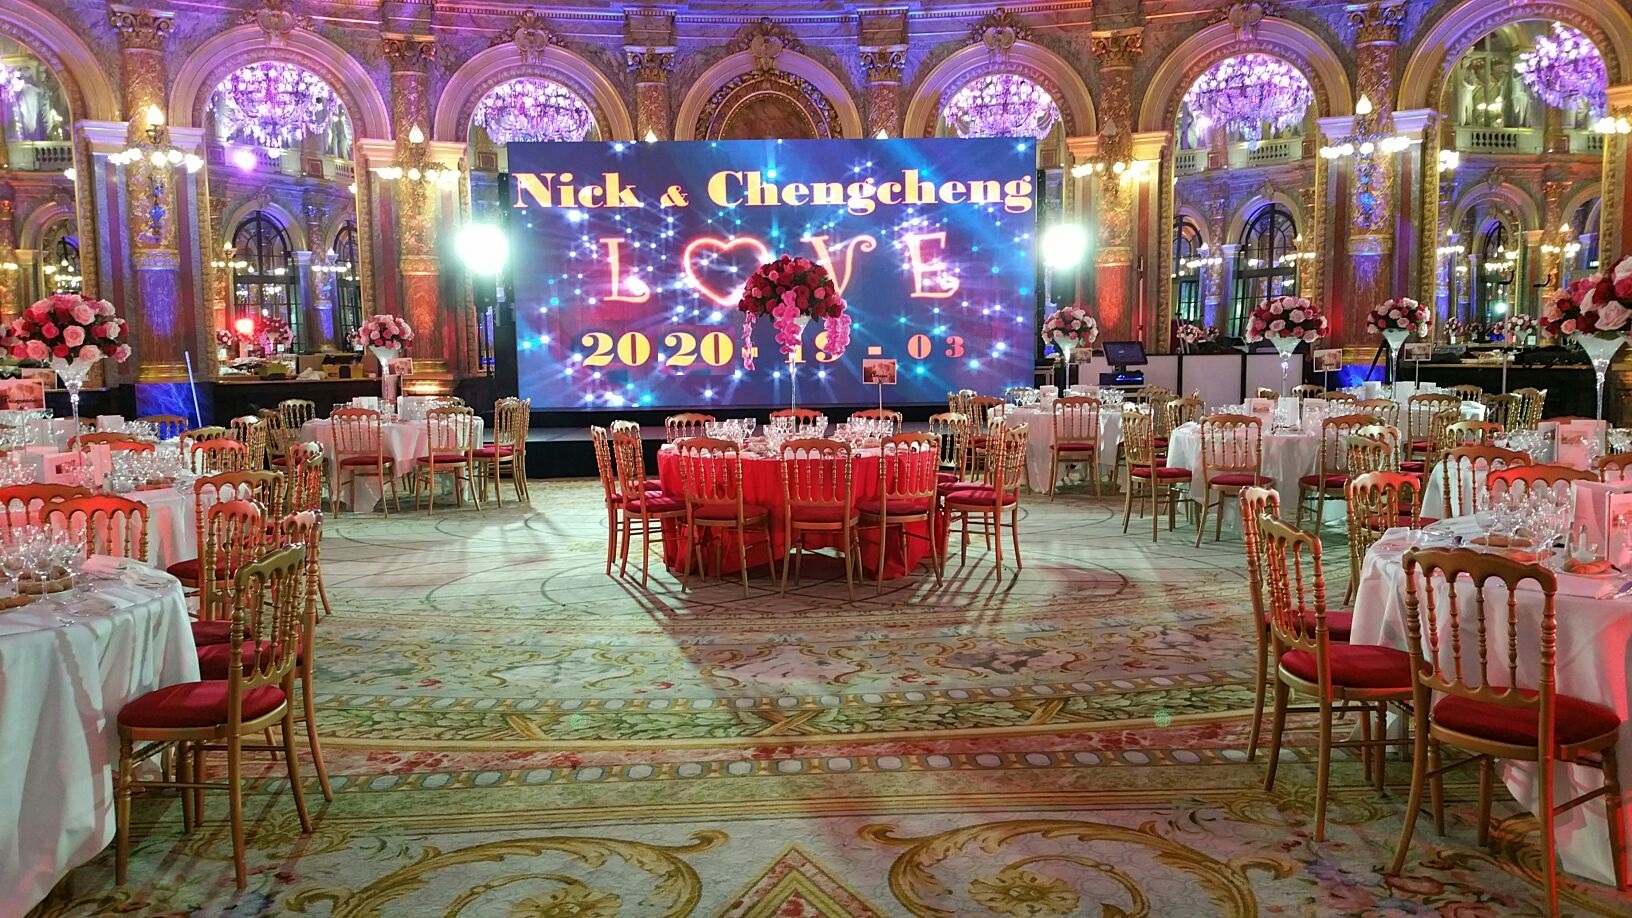 Rental - Hire a Led Wall for Weddings in Paris